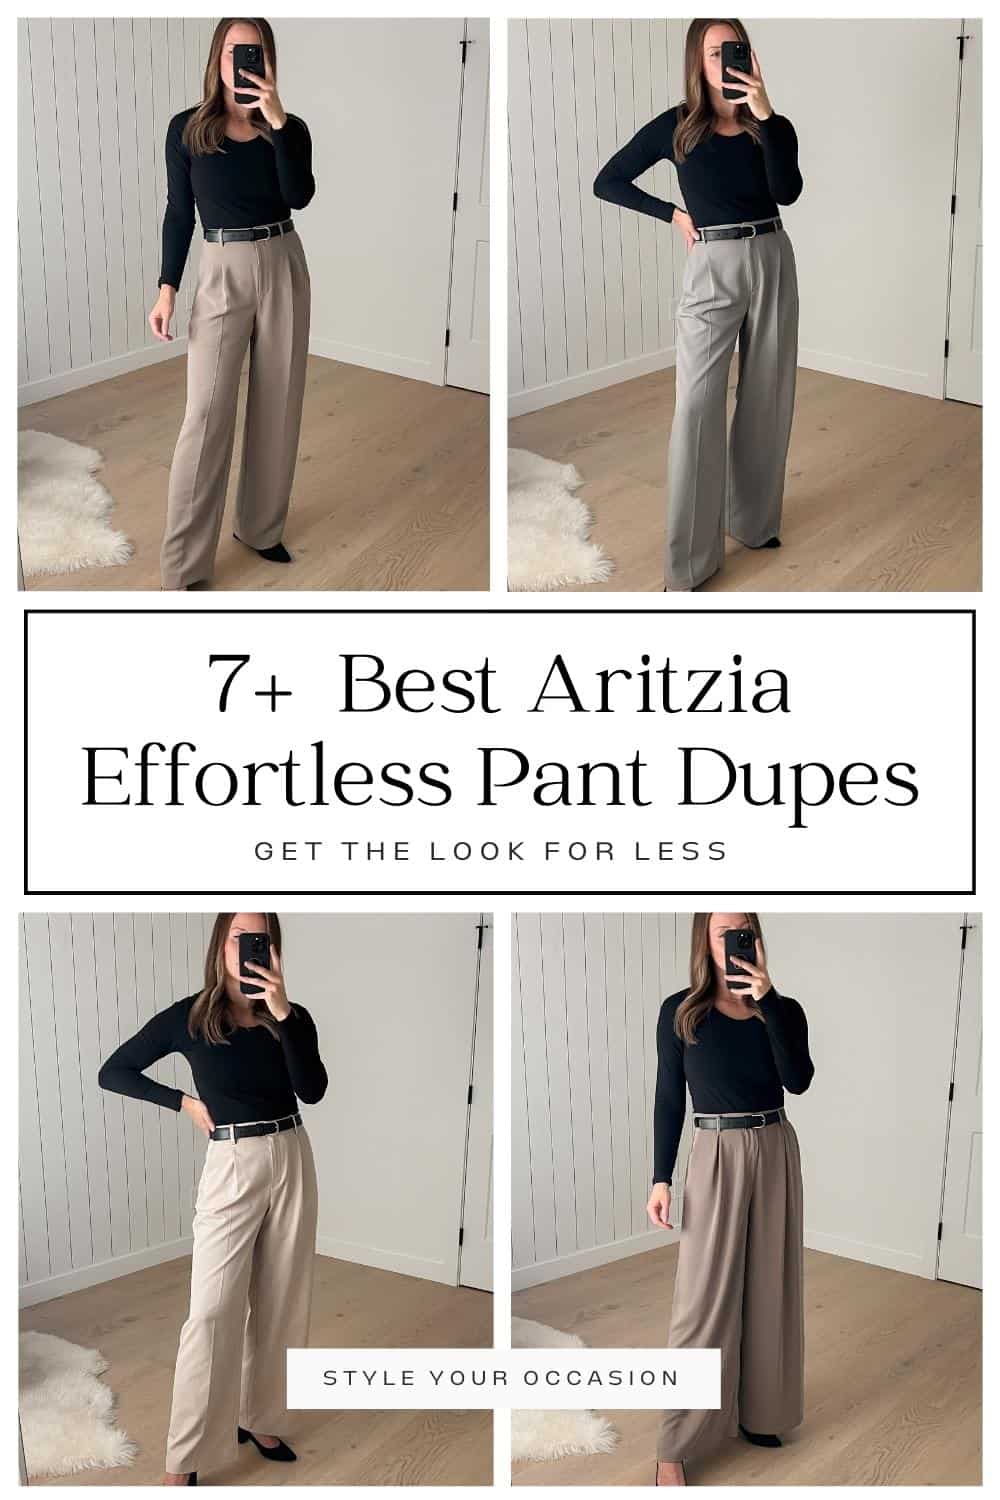 Christal wearing the Artizia Effortless pants and a black top, beside three more outfits with Effortless pants dupes